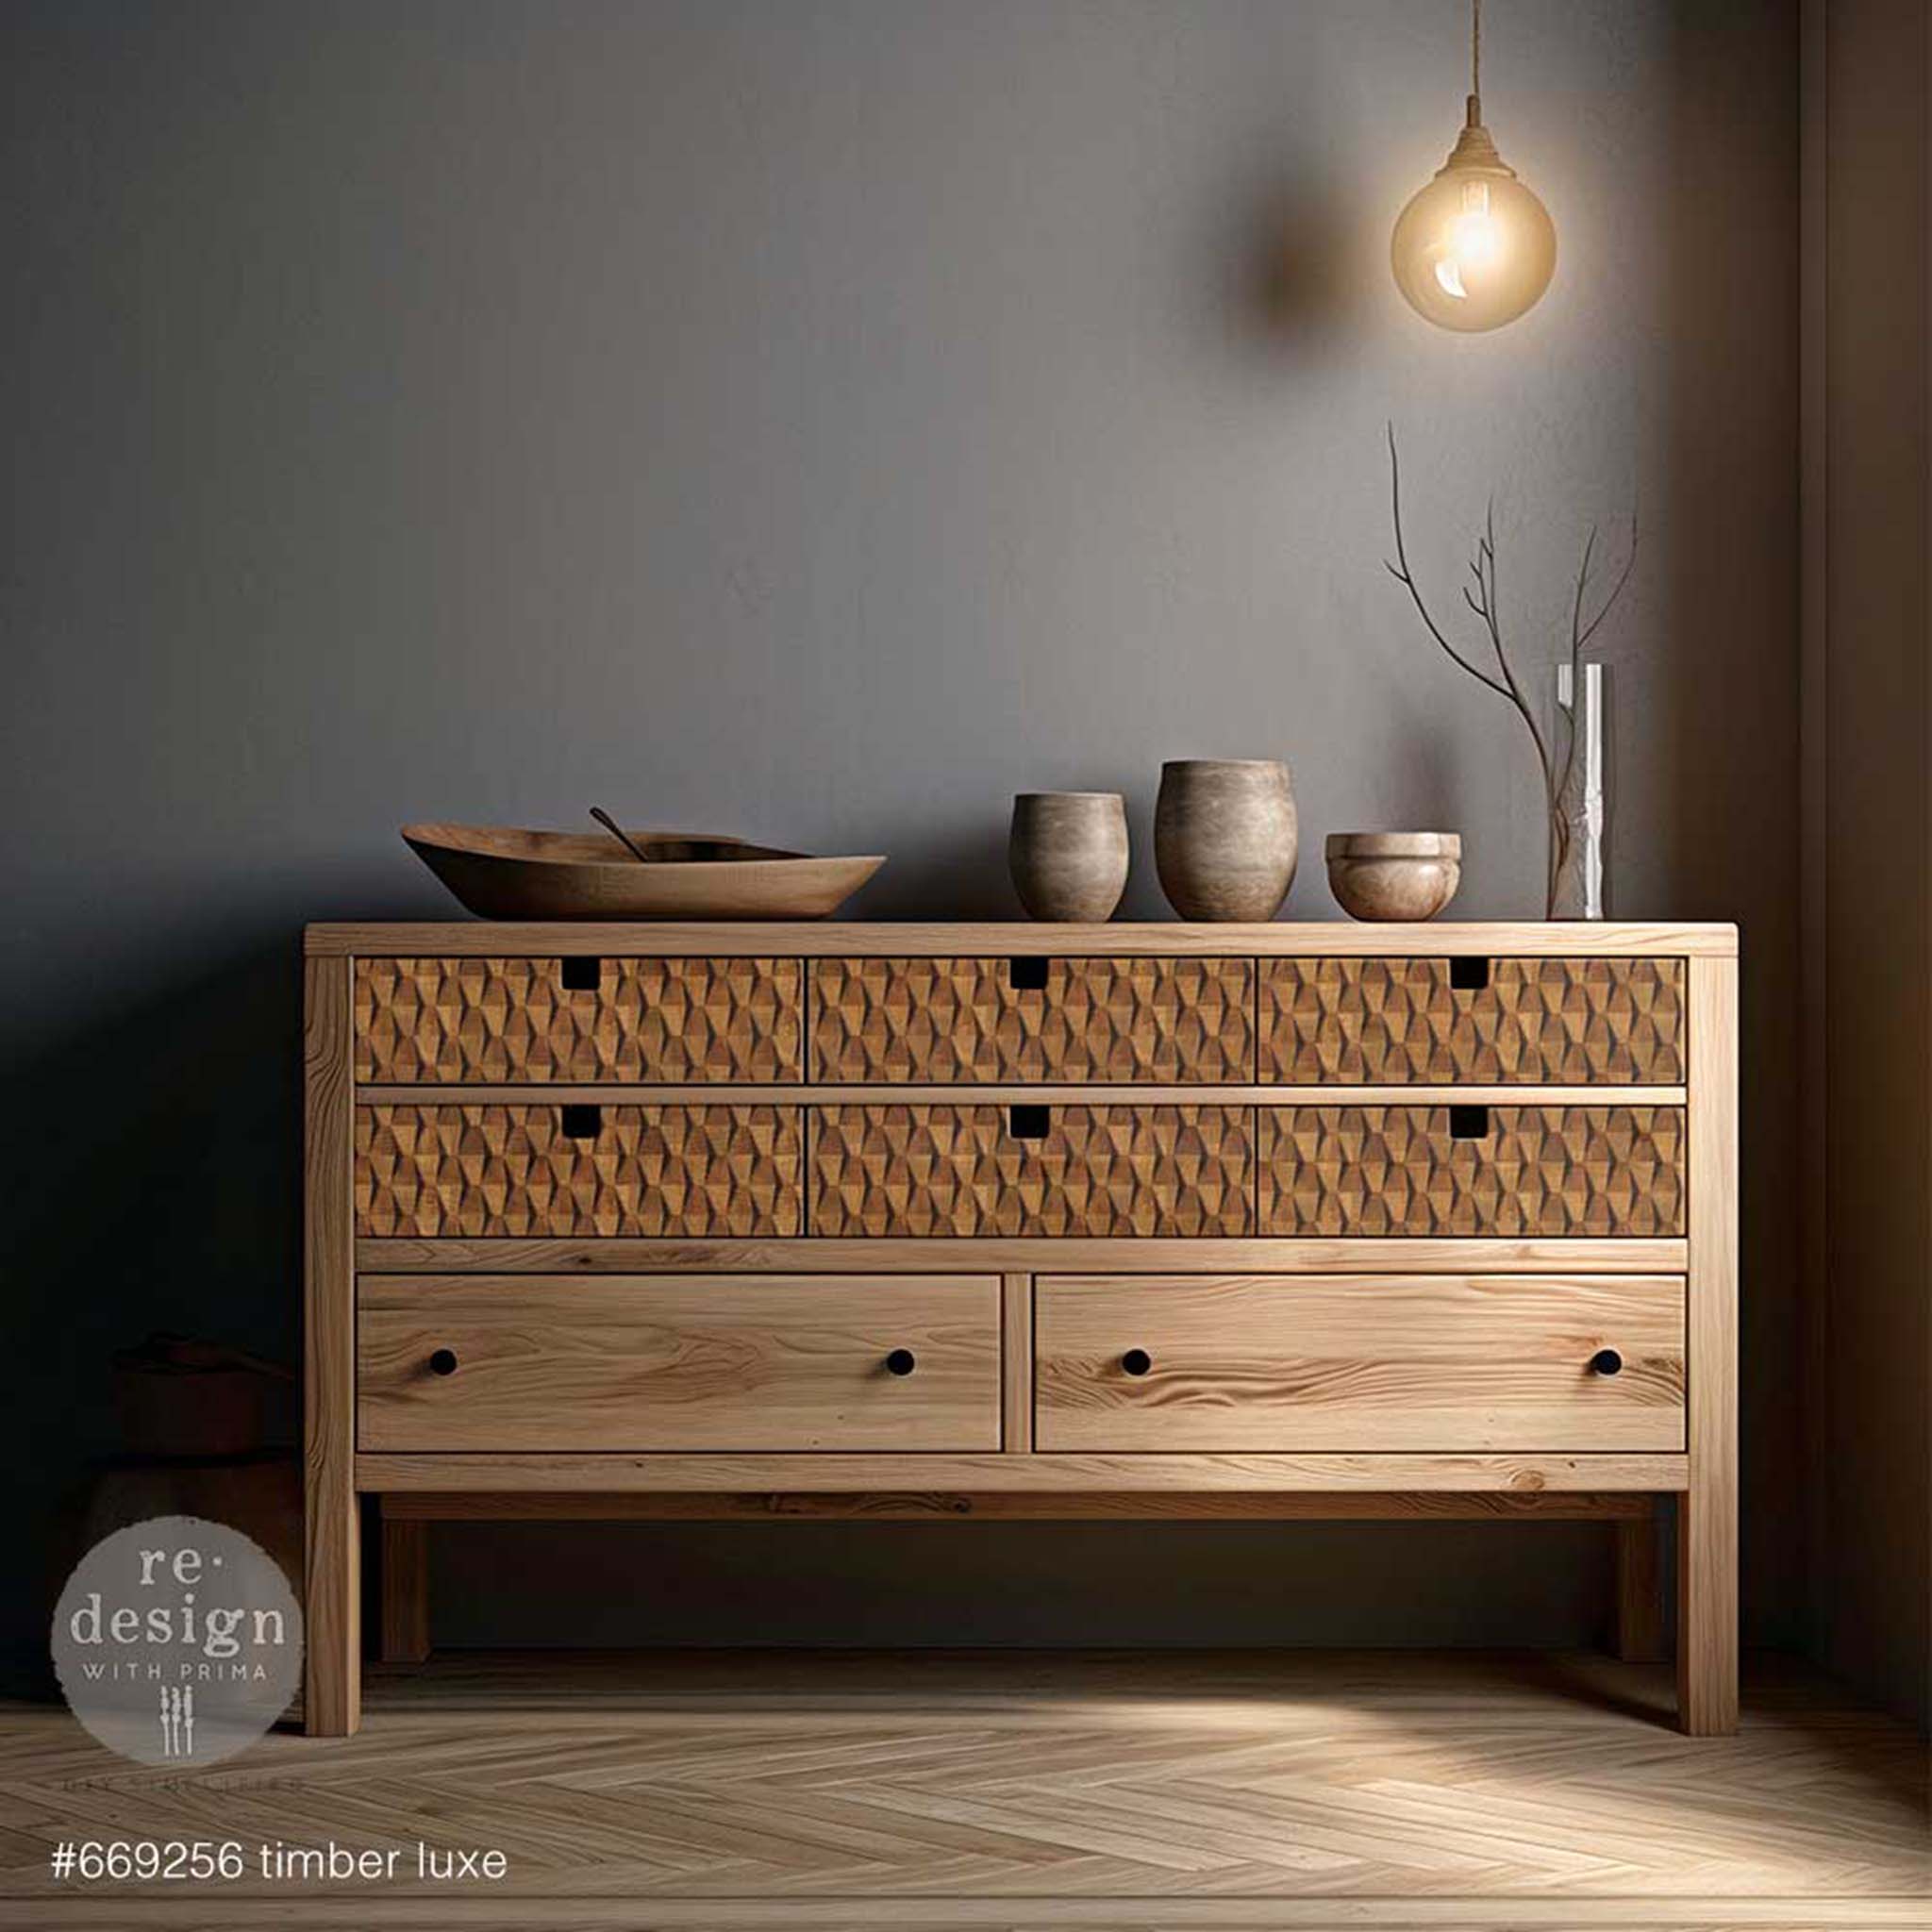 A large dresser is natural wood and features ReDesign with Prima's Timber Luxe A1 fiber paper on its top 6 small drawers.